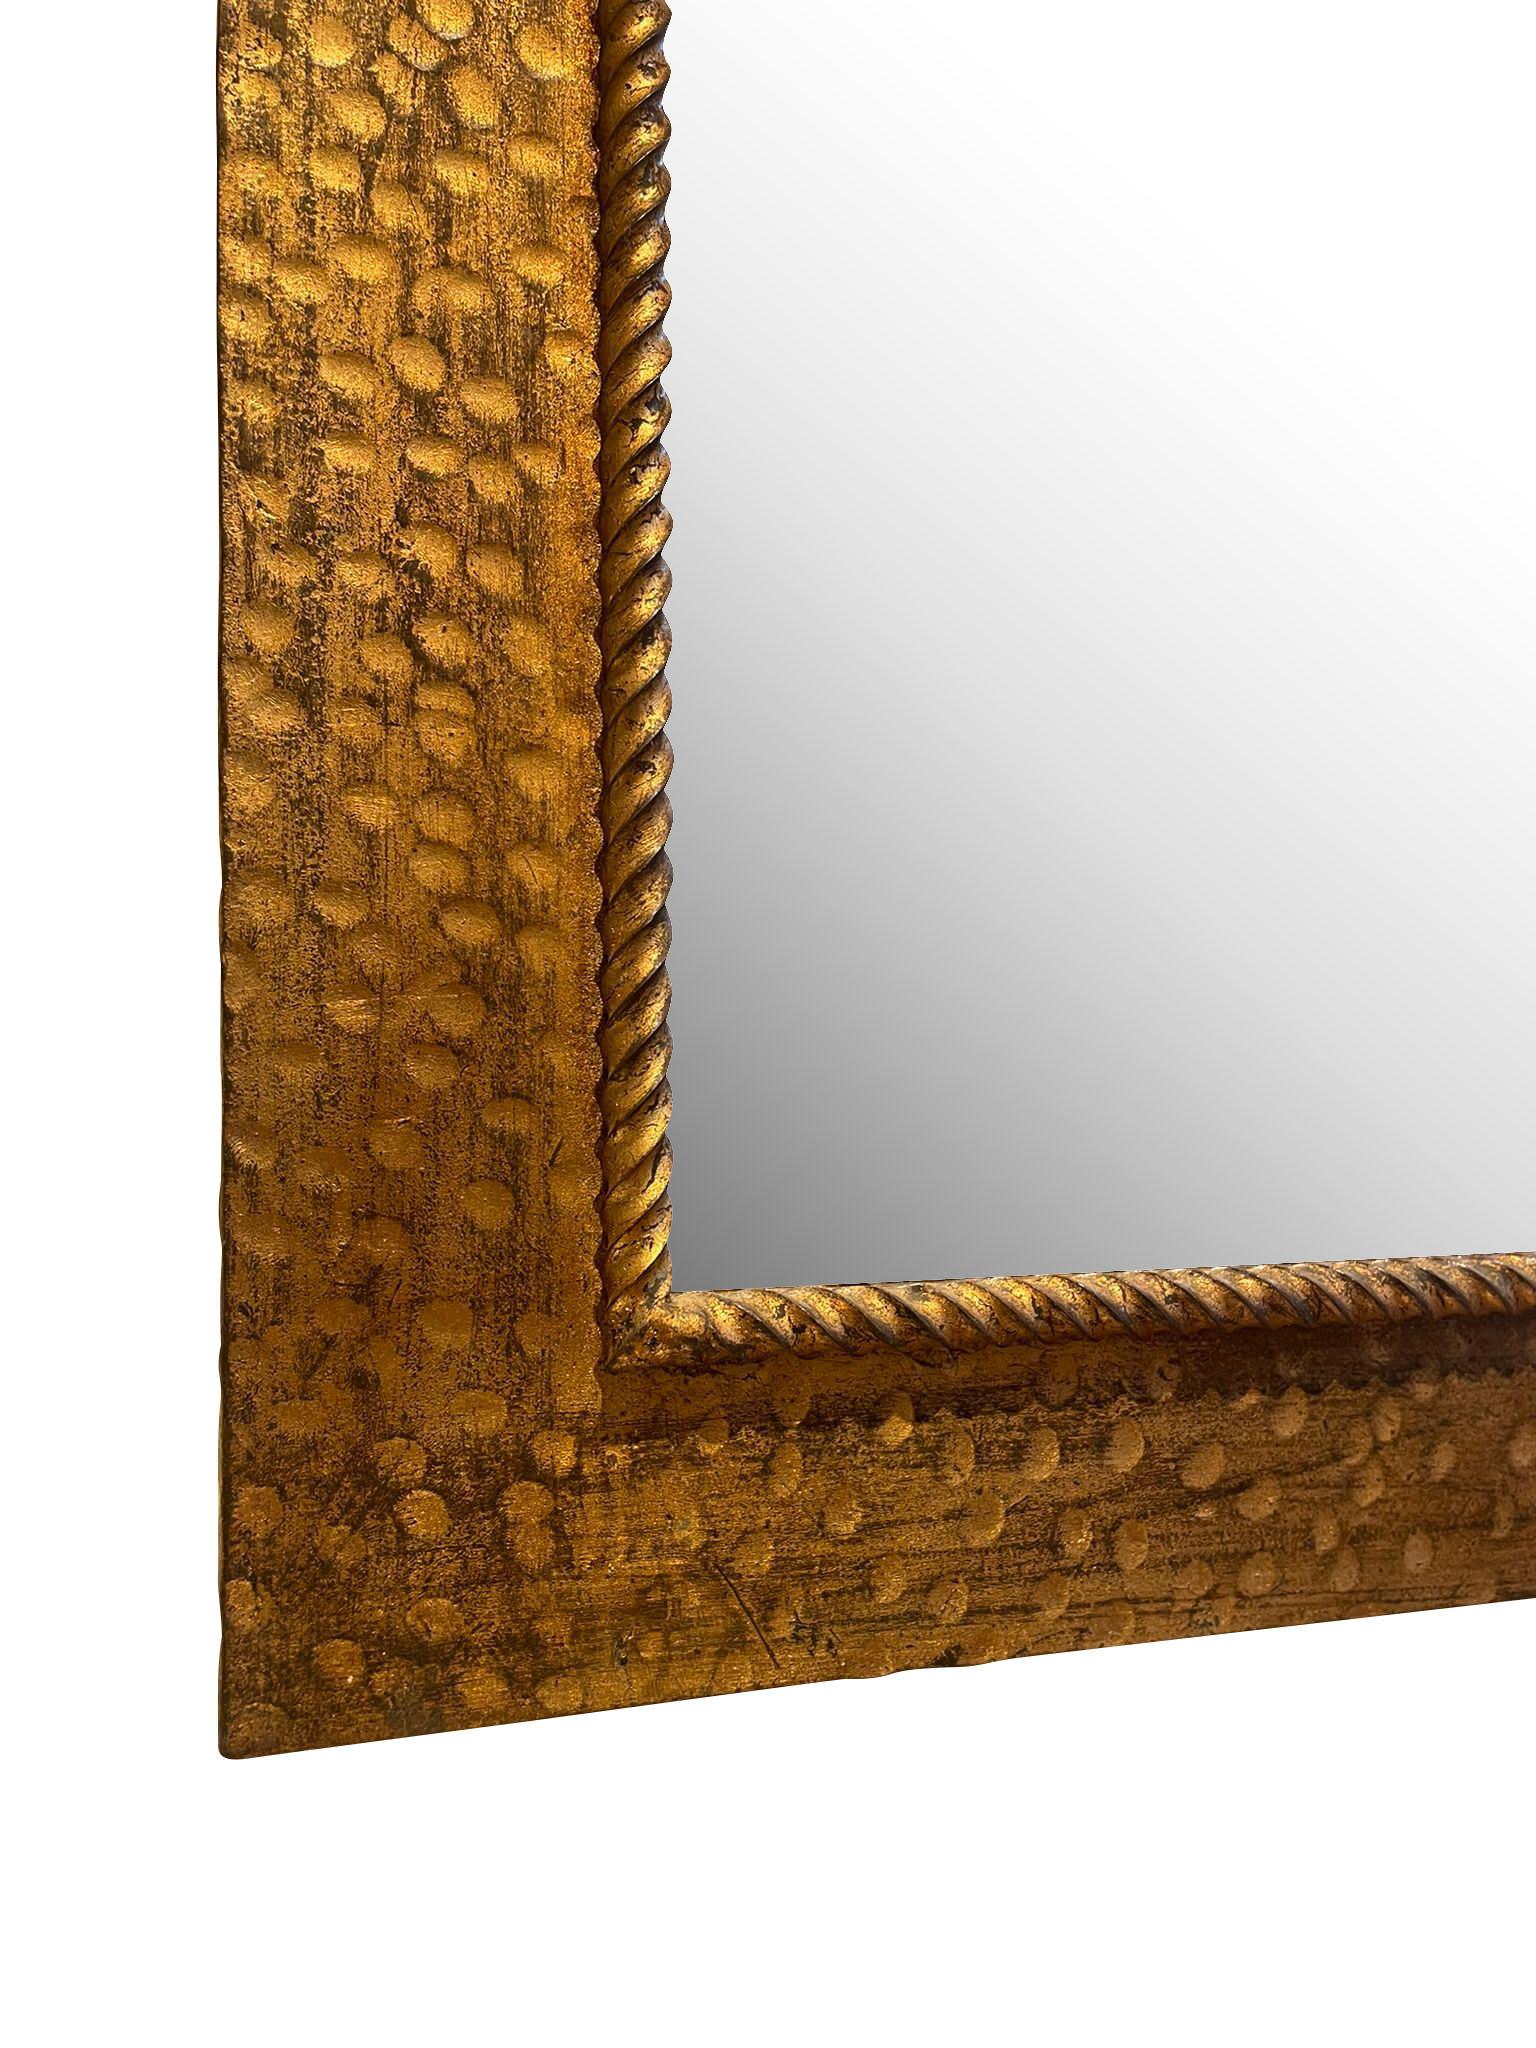 1950's Spanish gold gilt metal frame mirror.
Hammered decorative detailing.
Thin twisted rope edge.
ARRIVING NOVEMBER.